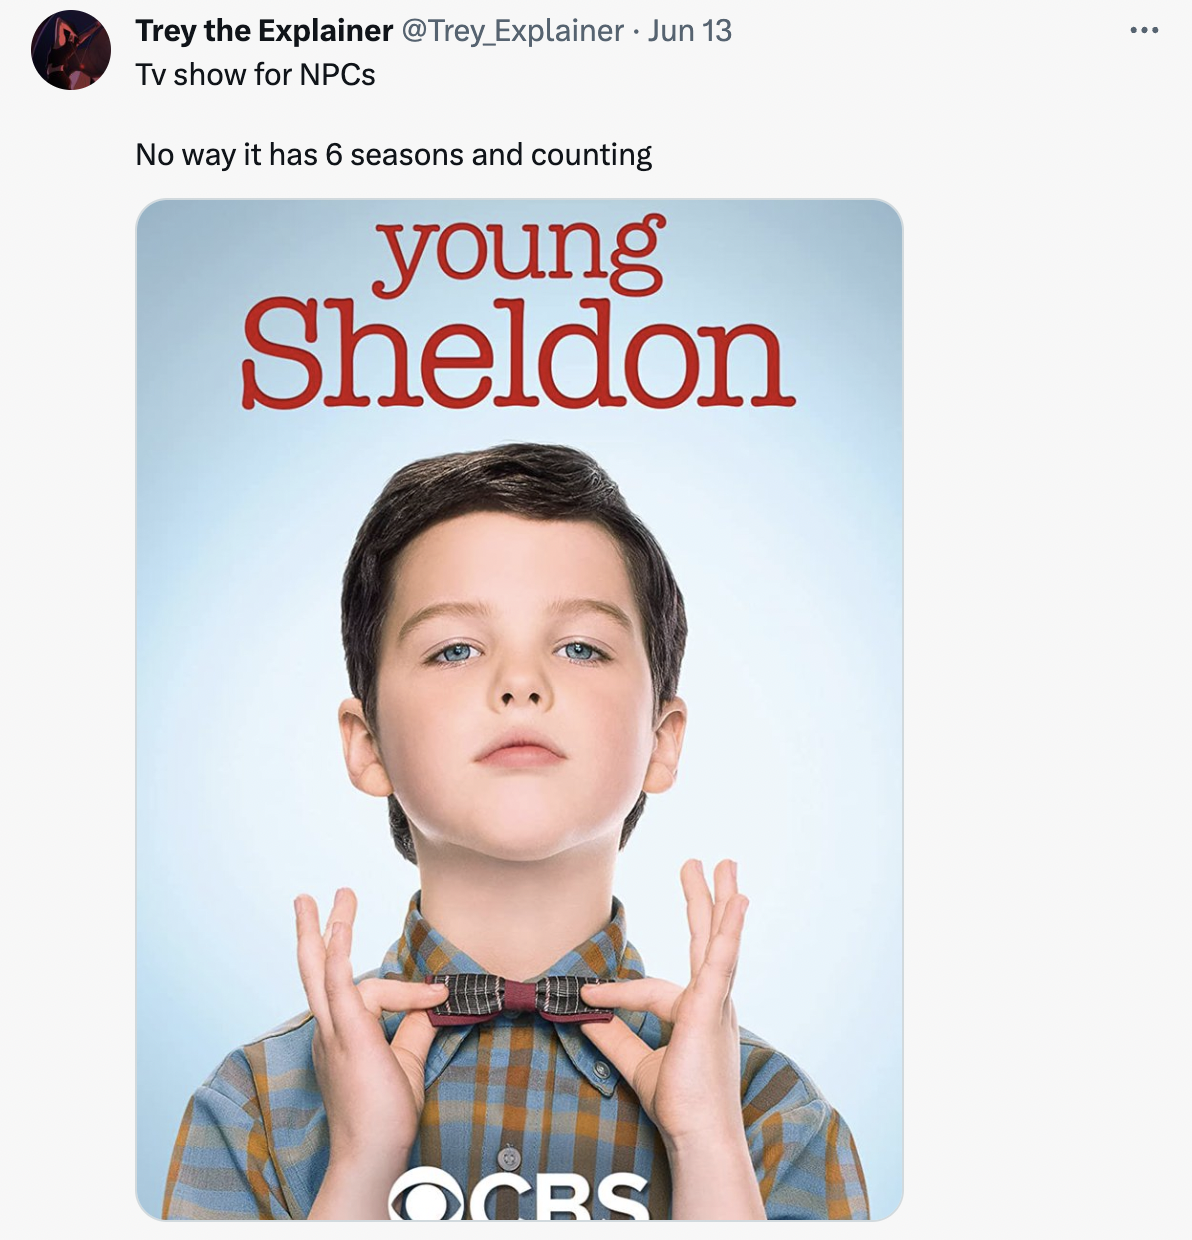 delicious magazine - Trey the Explainer Explainer Jun 13 Tv show for NPCs No way it has 6 seasons and counting young Sheldon Ocbs